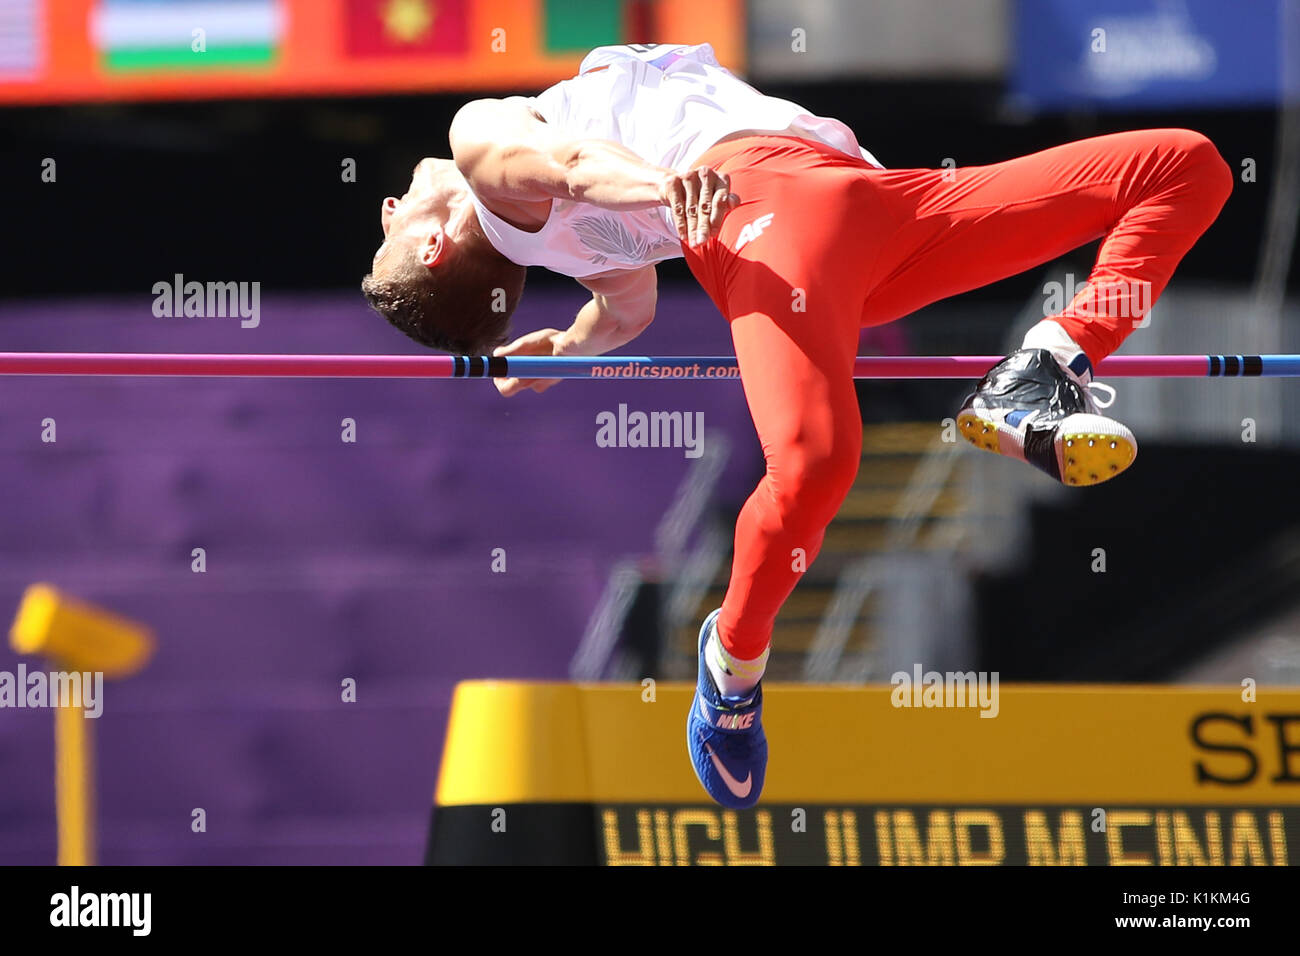 Maciej LEPIATO of Poland in the Men's High Jump T44 Final at the World Para Championships in London 2017 Stock Photo